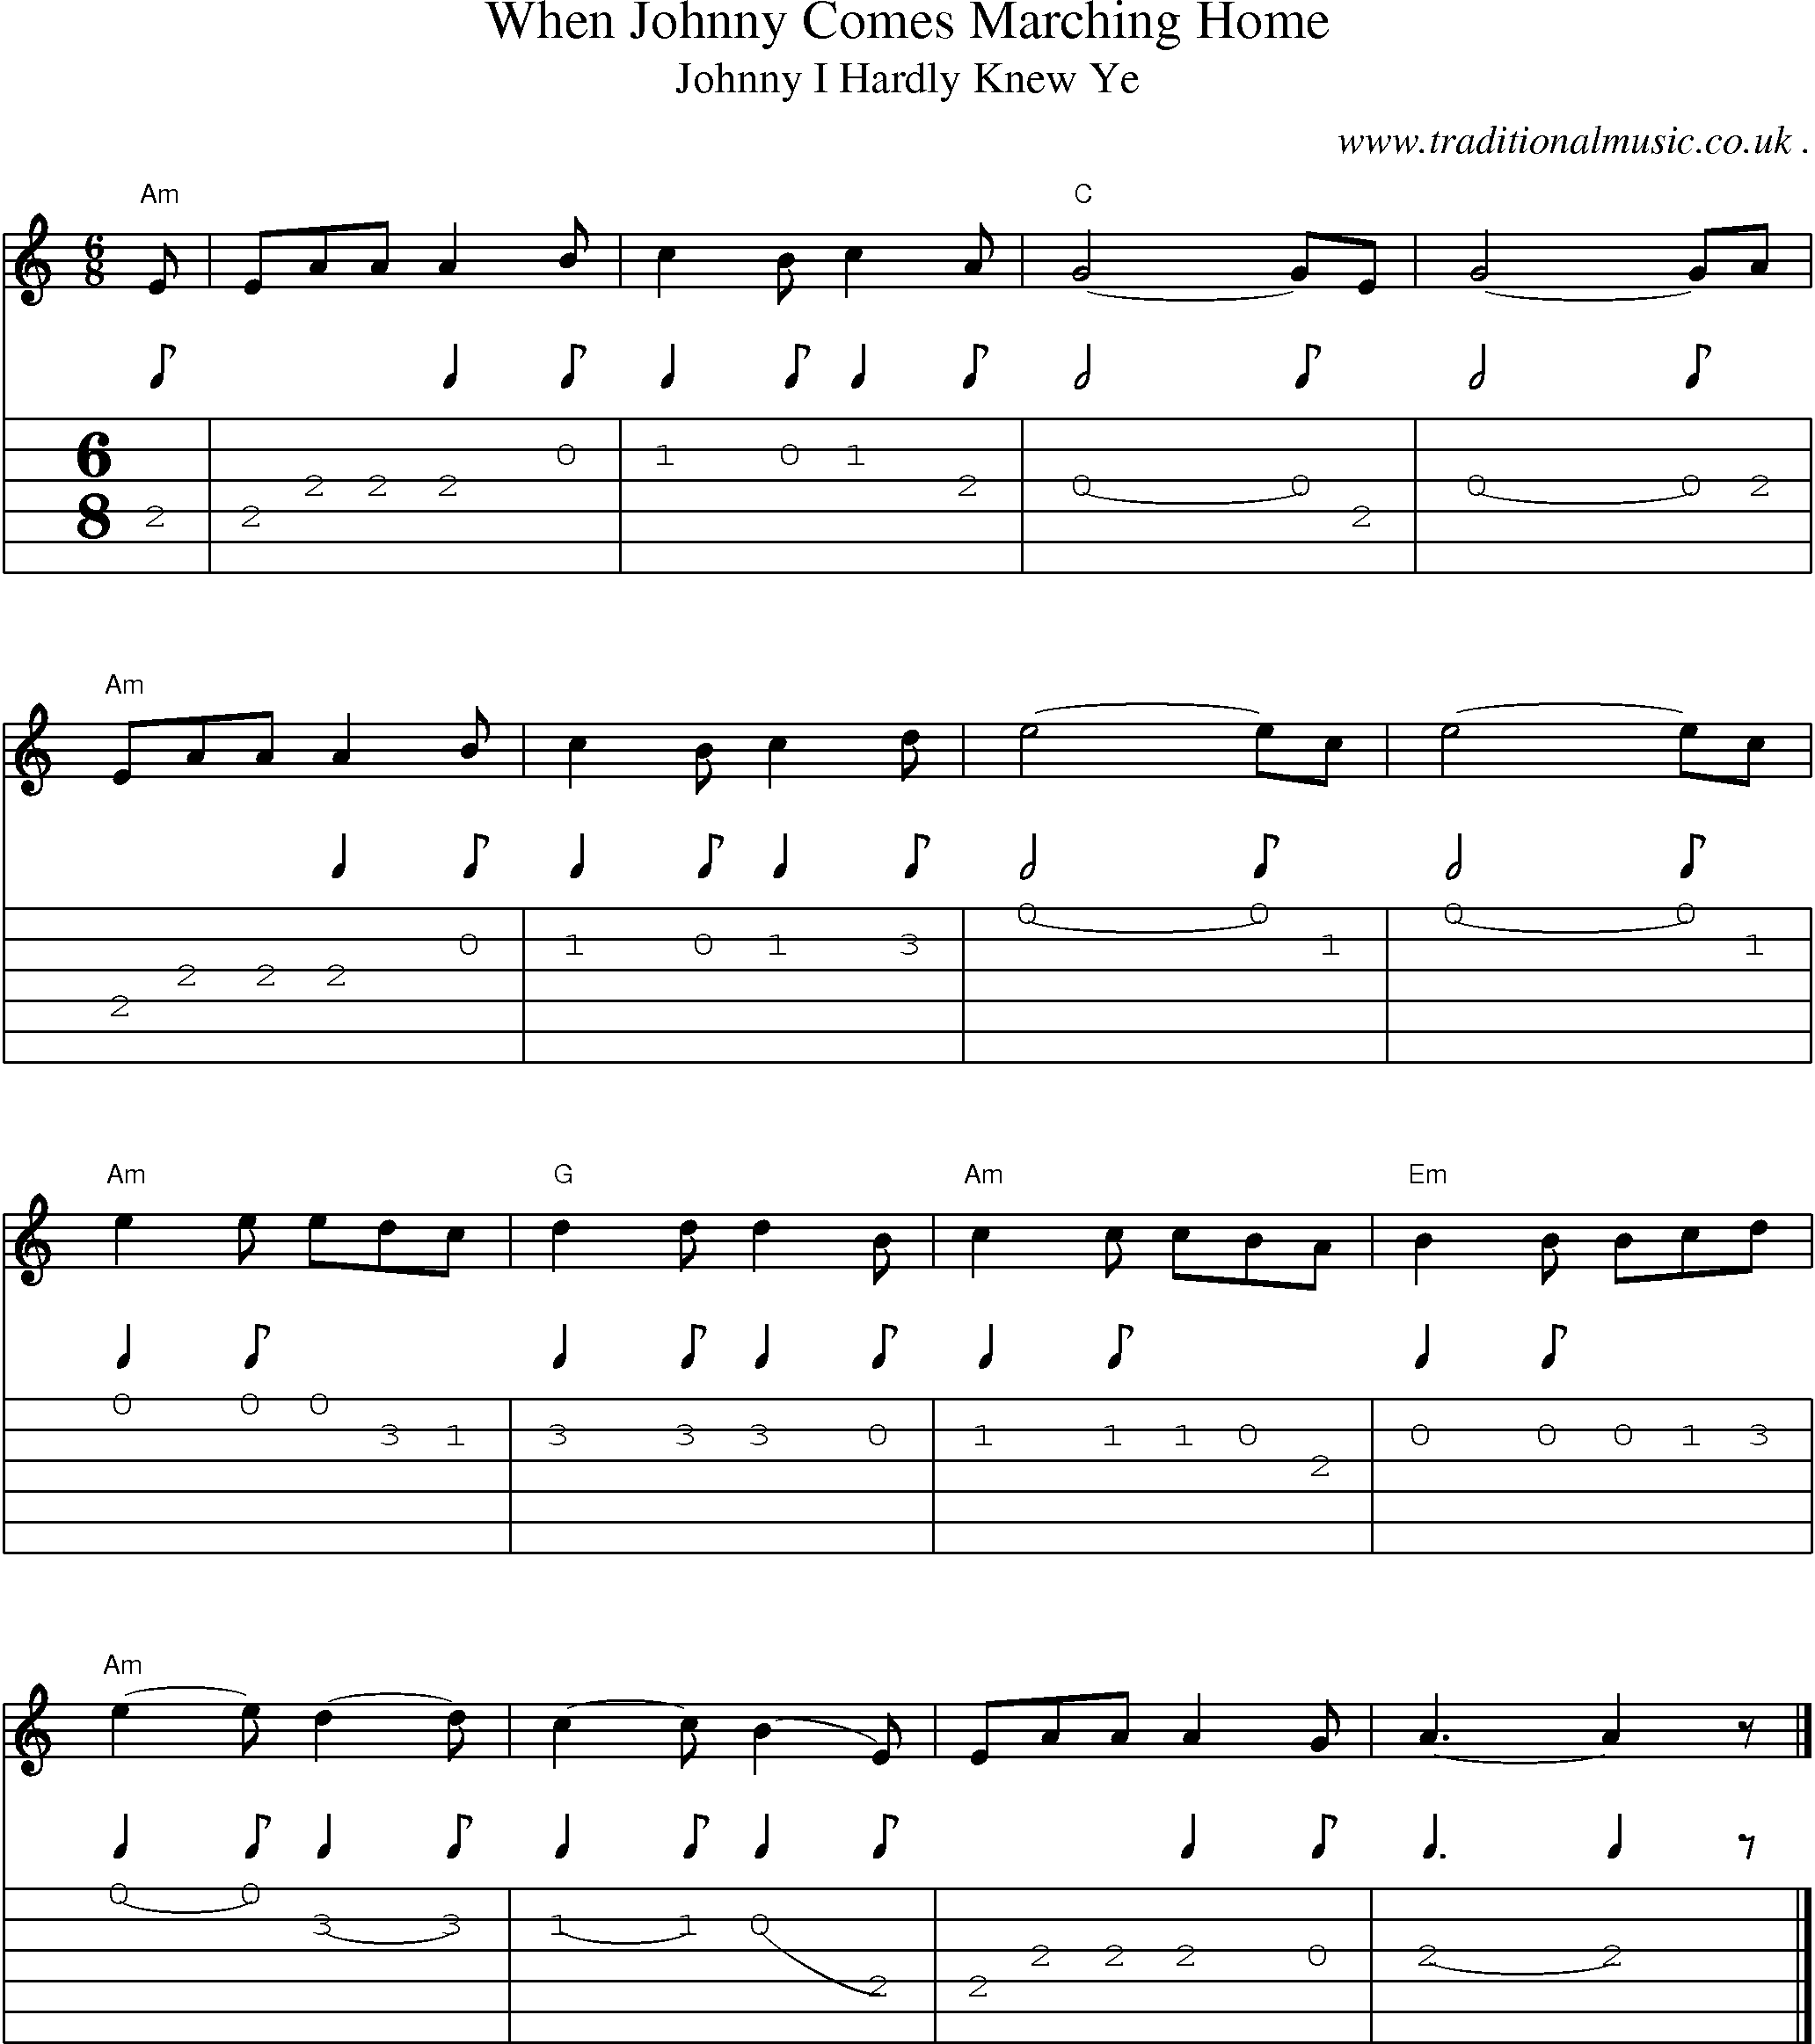 Music Score and Guitar Tabs for When Johnny Comes Marching Home